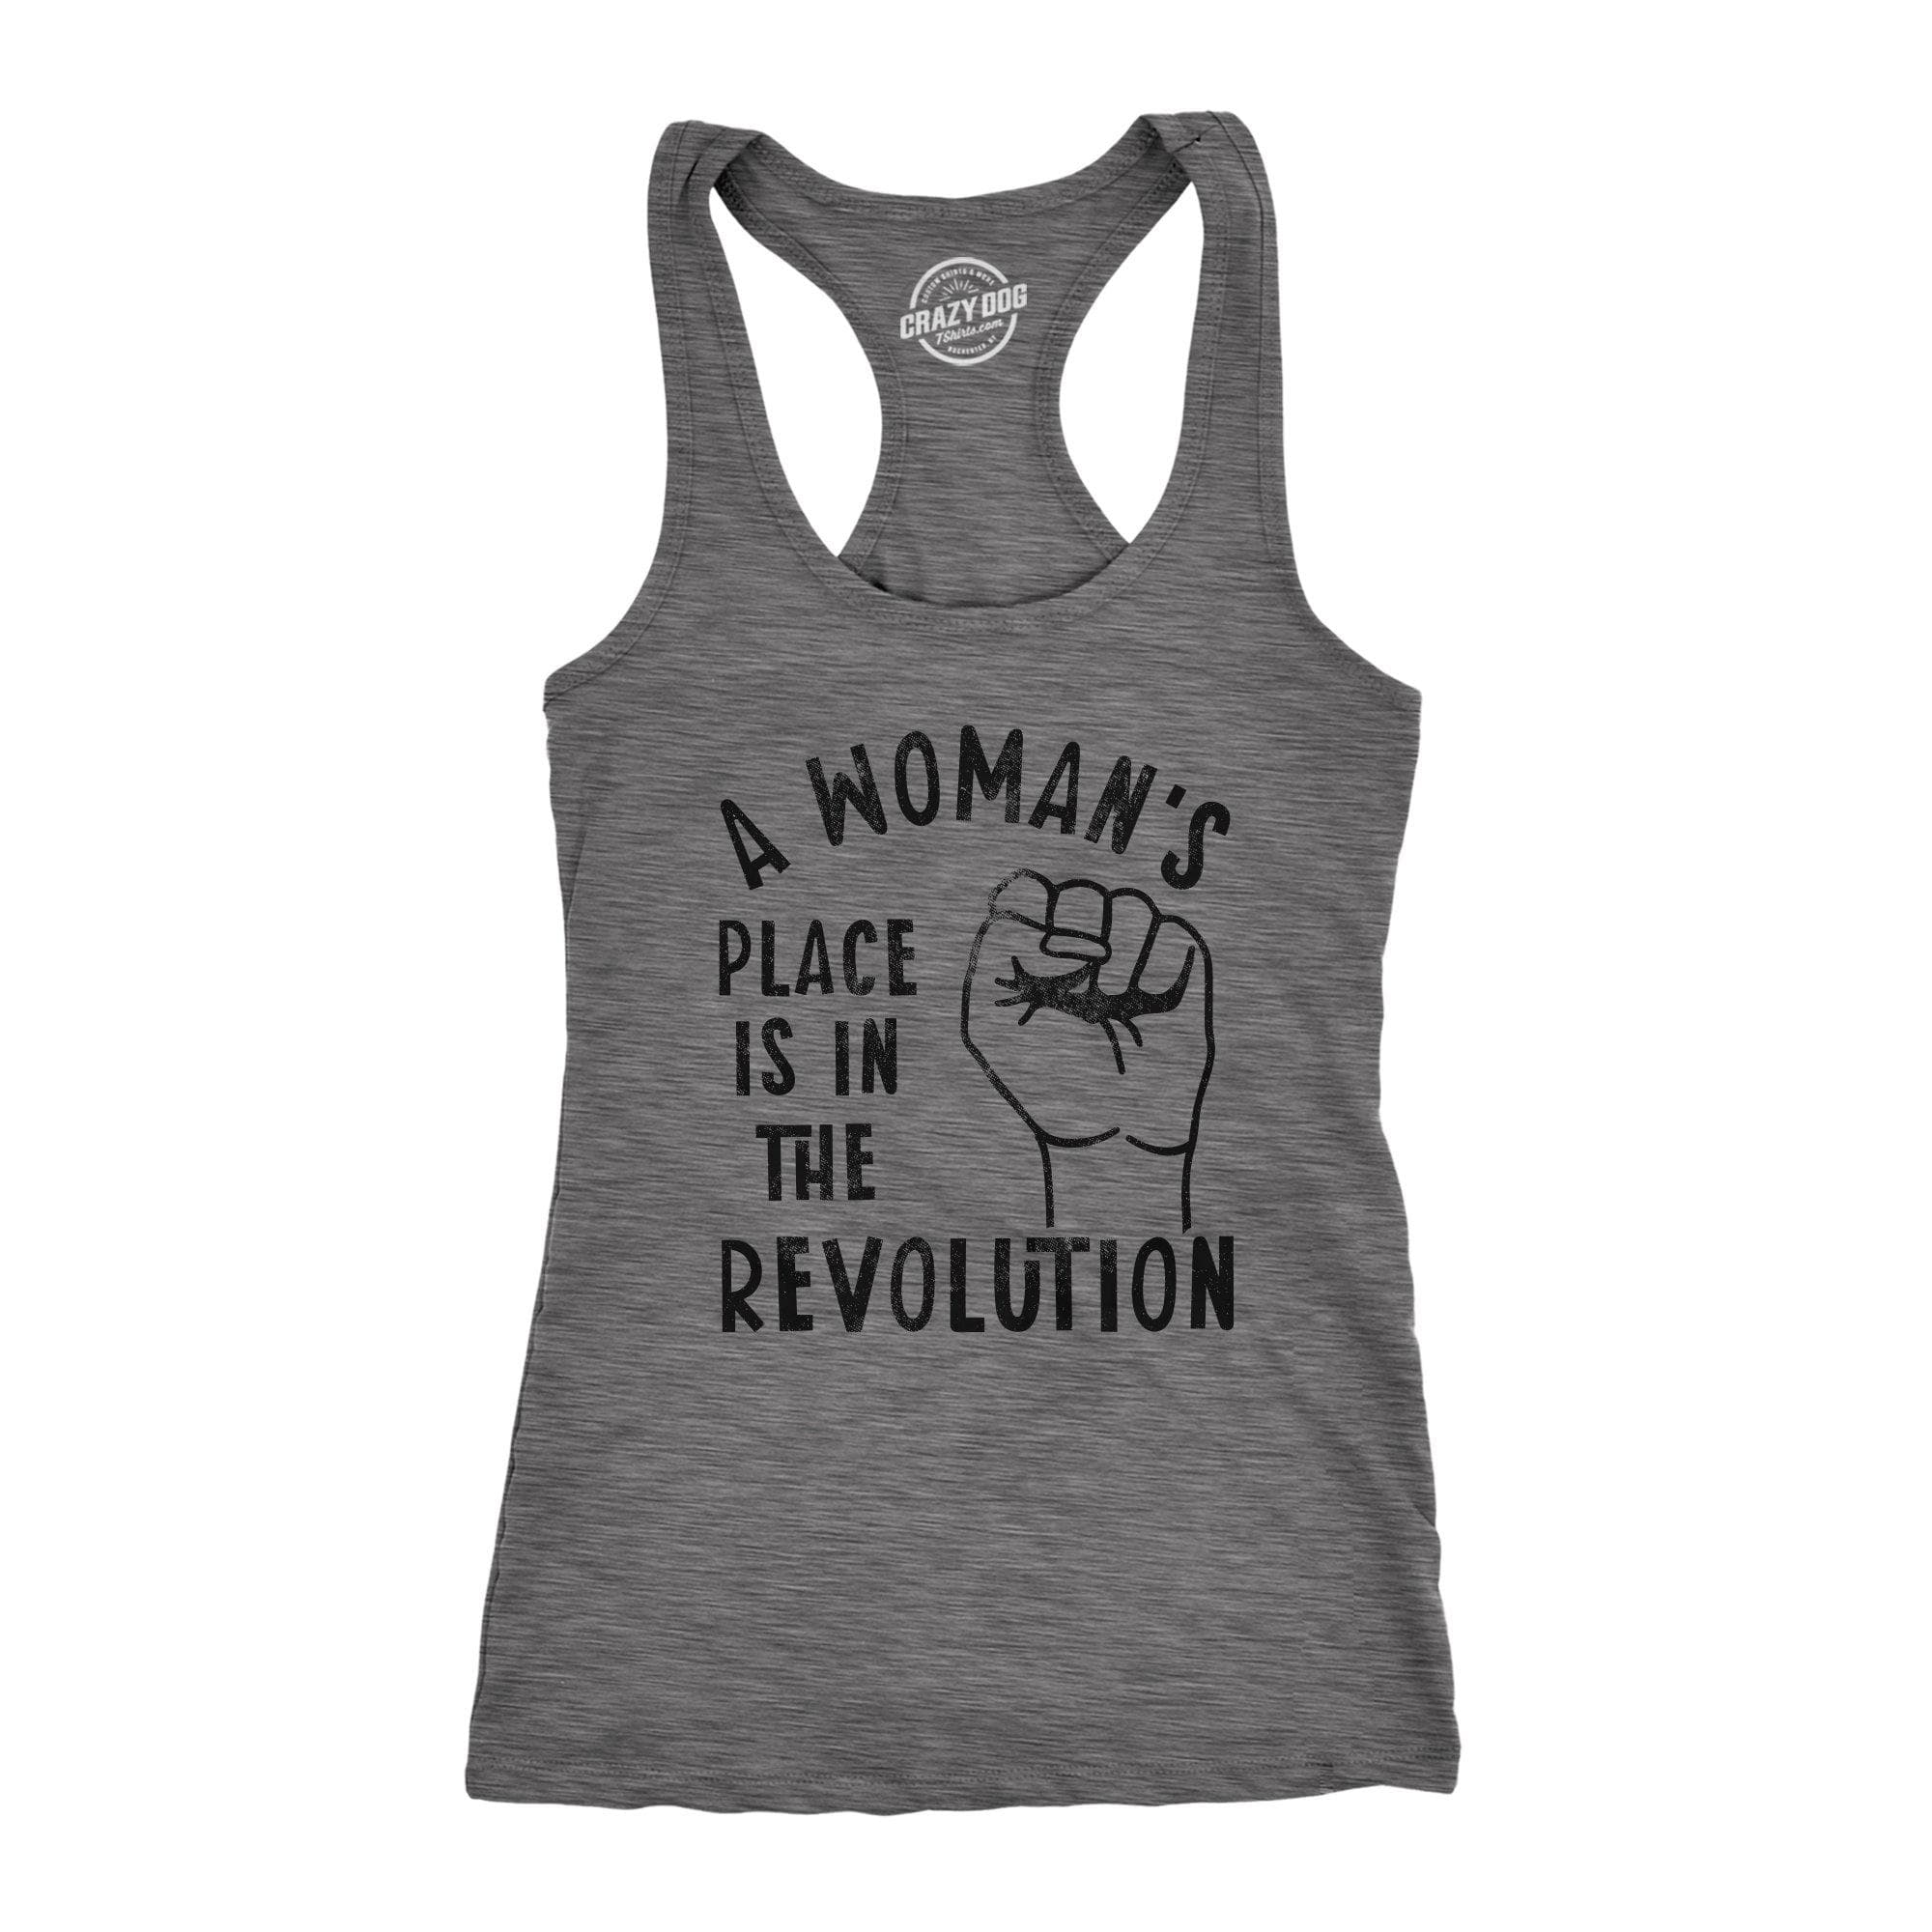 A Woman's Place Is In The Revolution Women's Tank Top - Crazy Dog T-Shirts